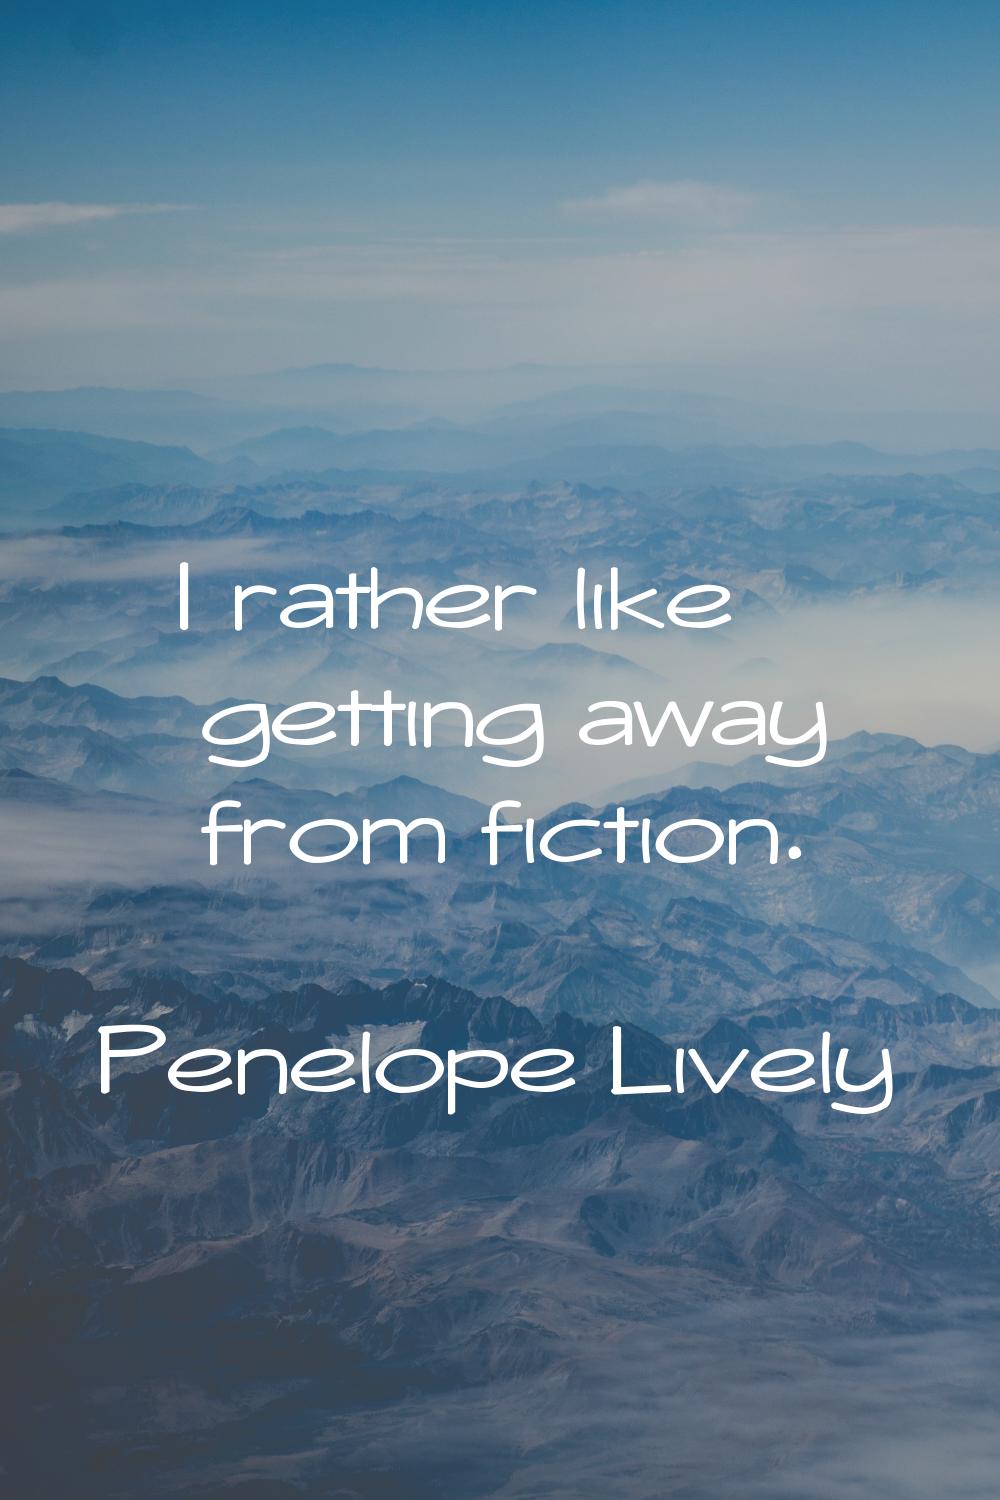 I rather like getting away from fiction.